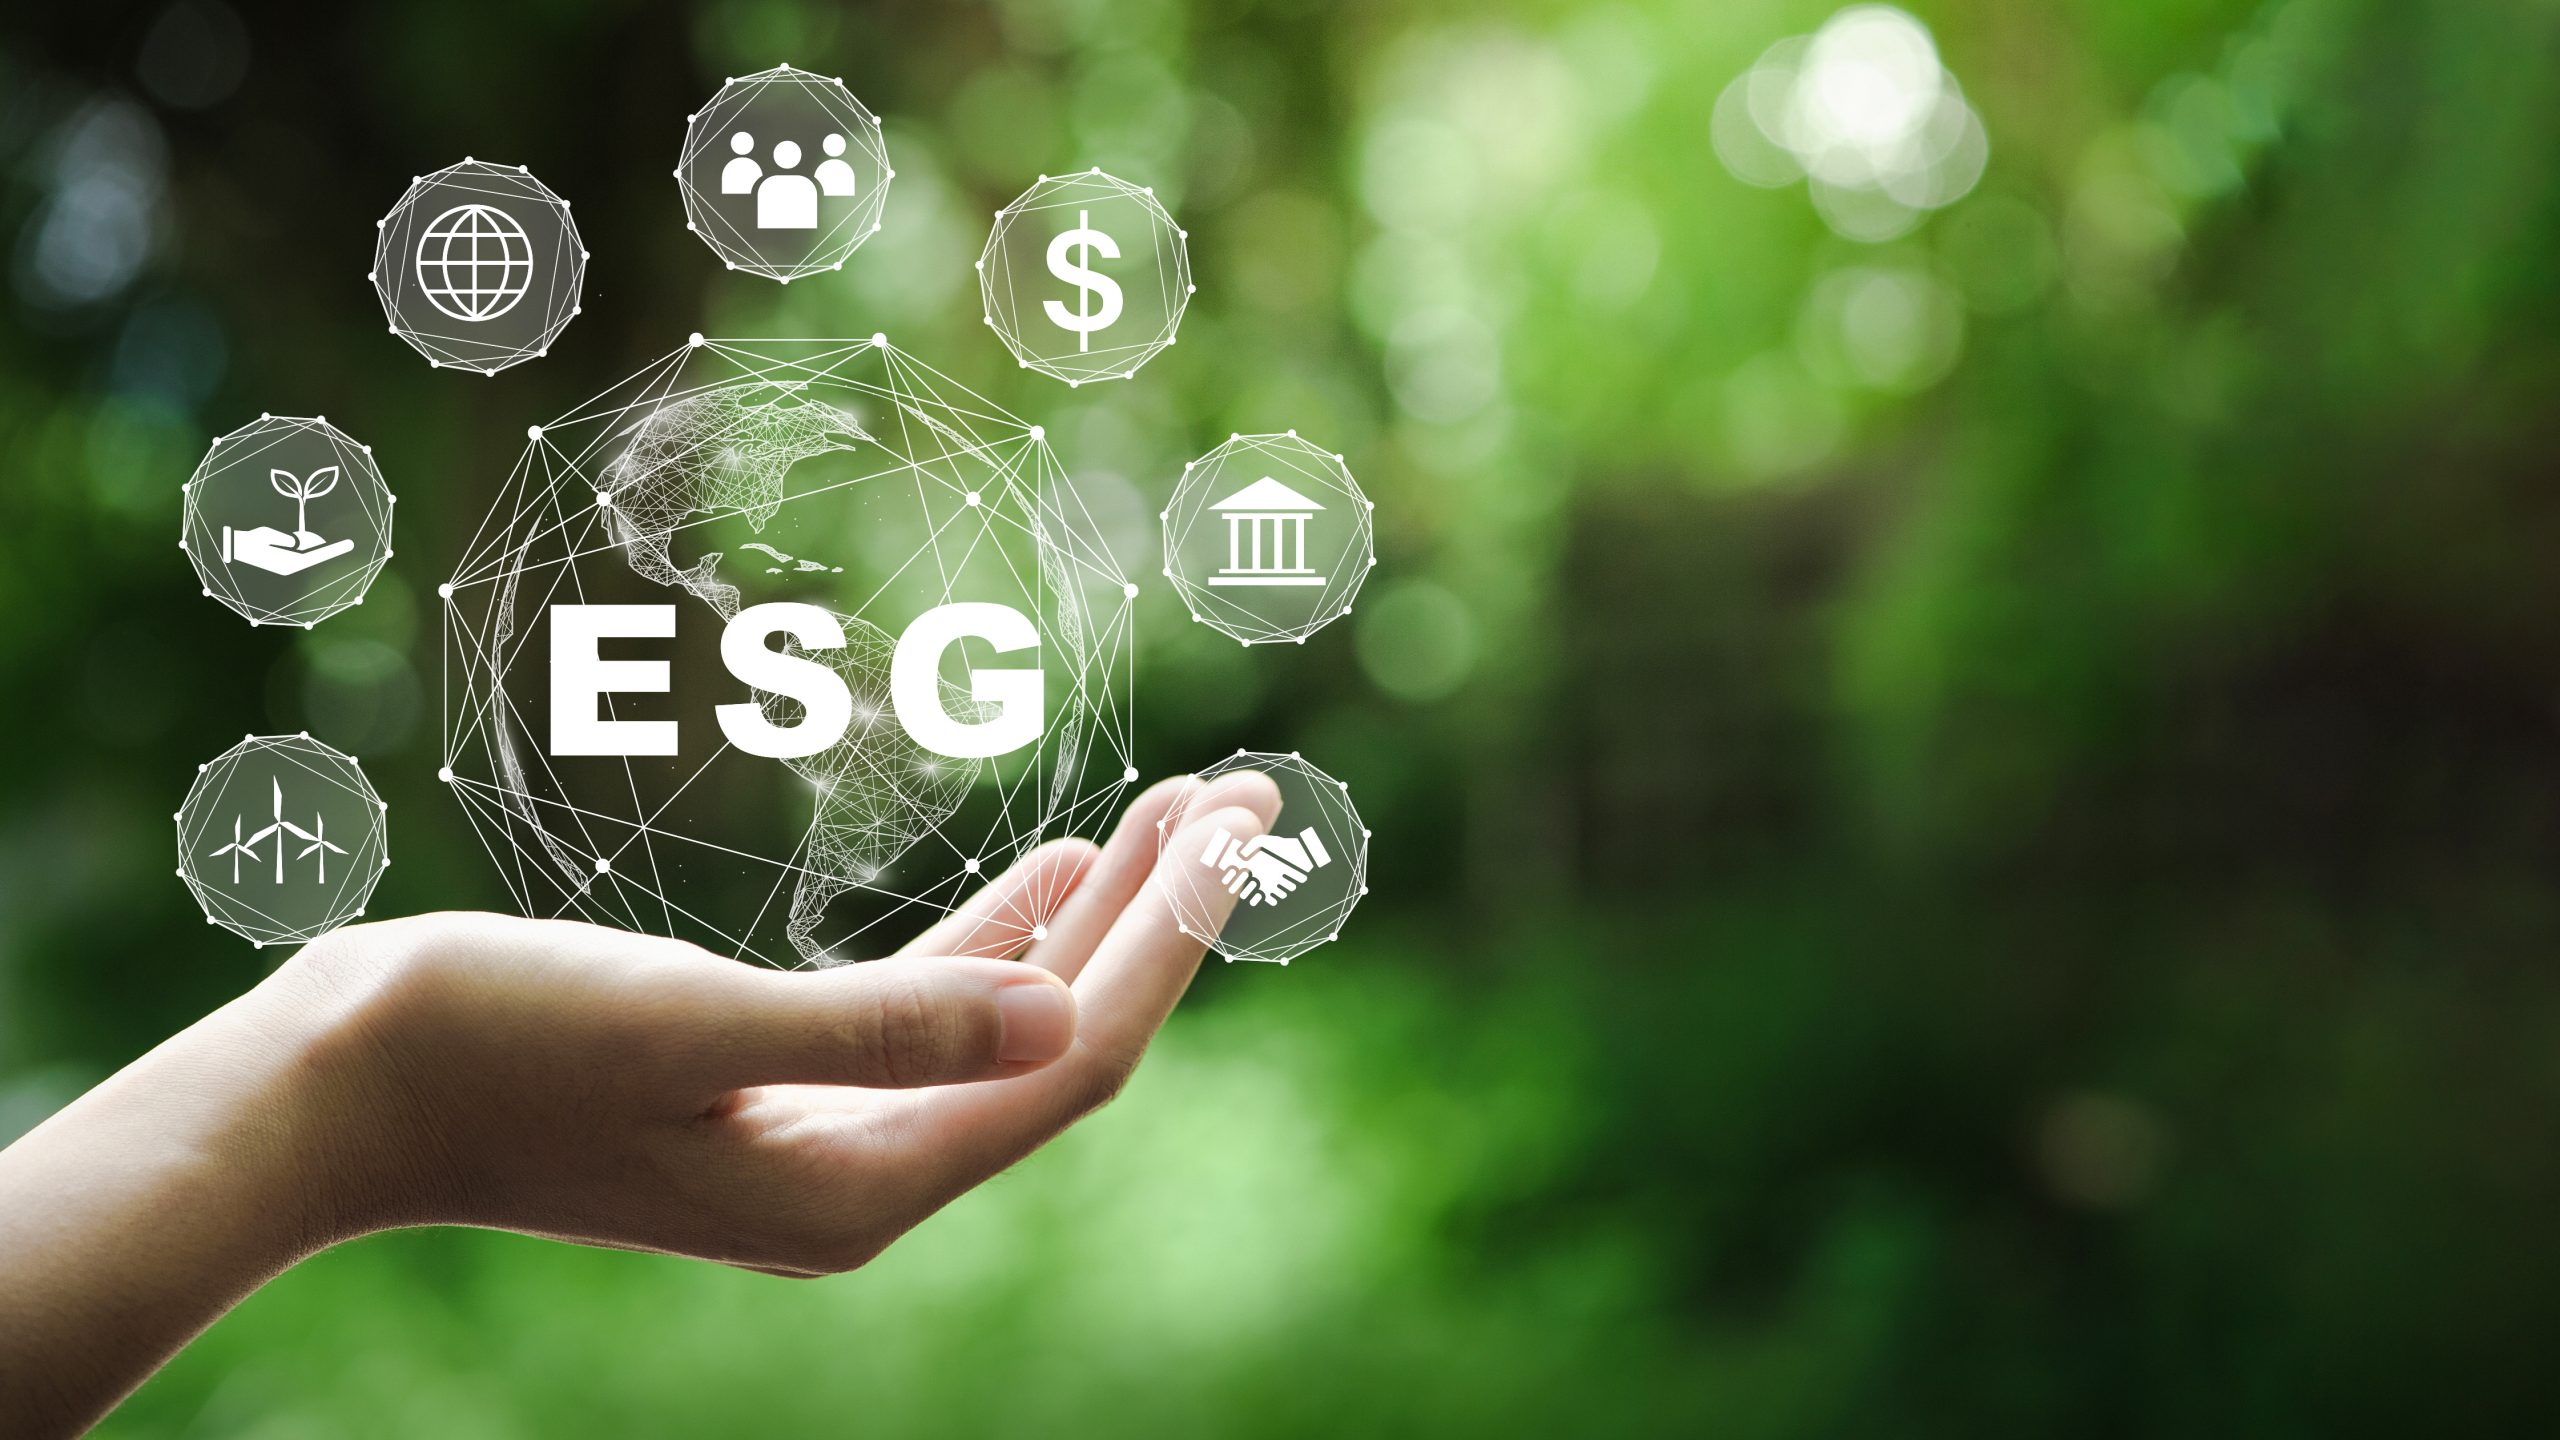 You are currently viewing ESG – Environment, Social & Governance.